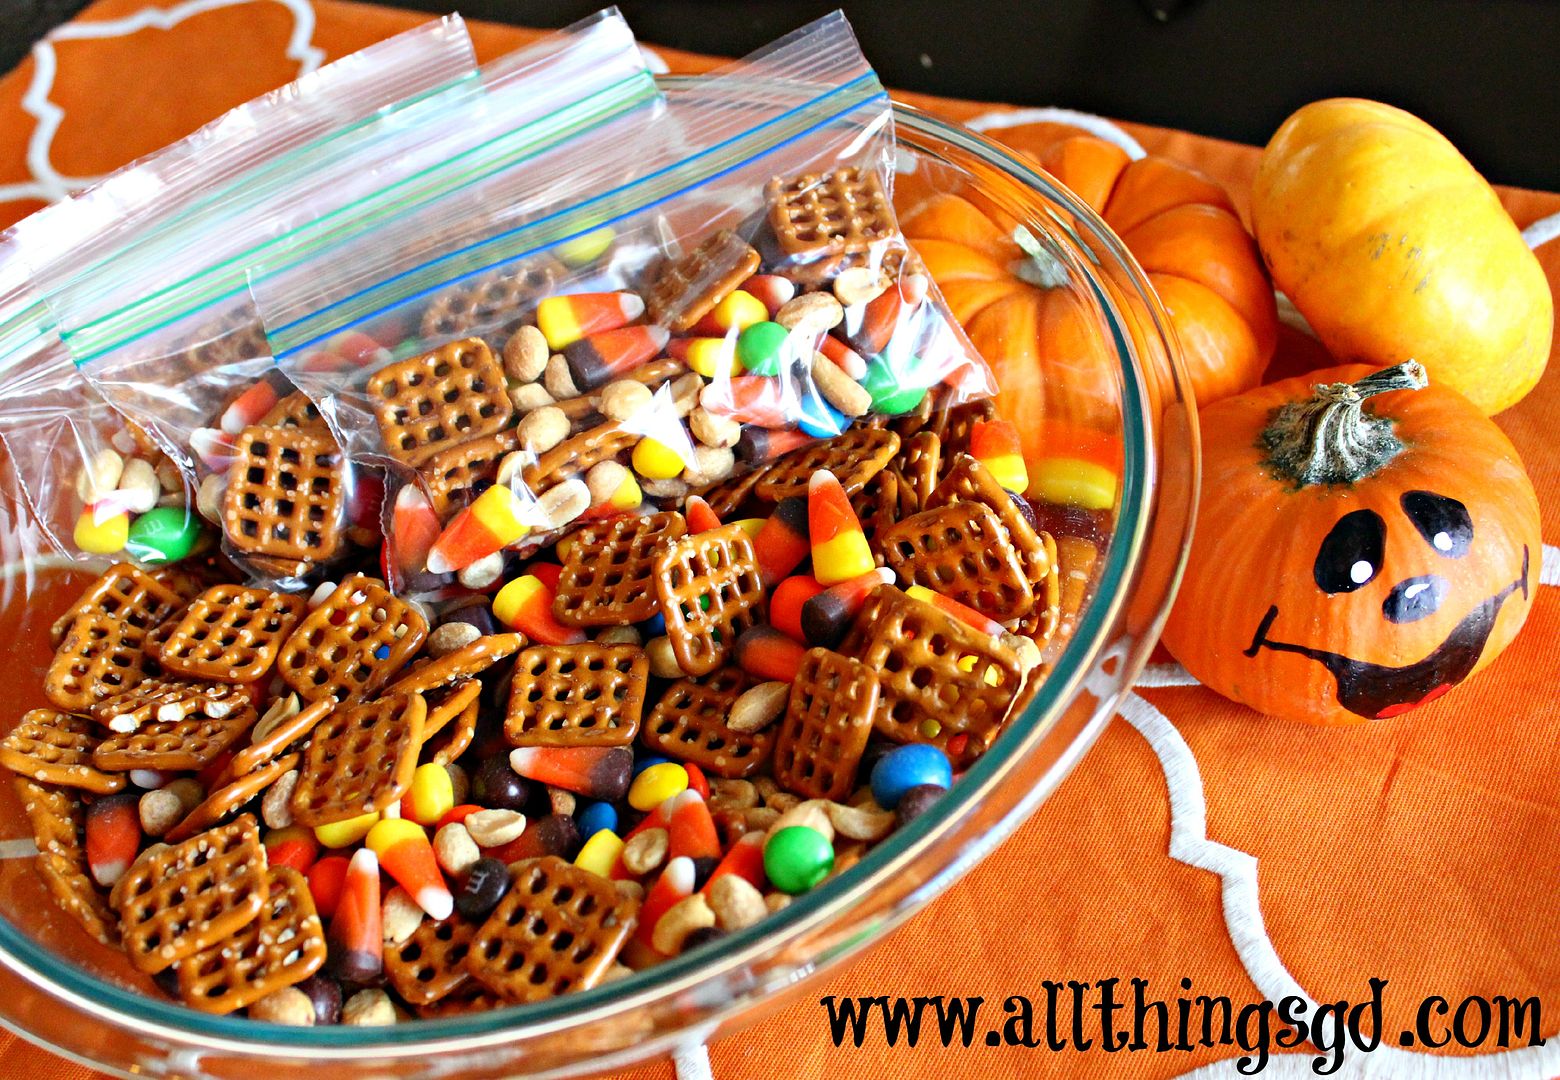 Festive Fall Snack Mix - great for upcoming Halloween parties! | www.allthingsgd.com